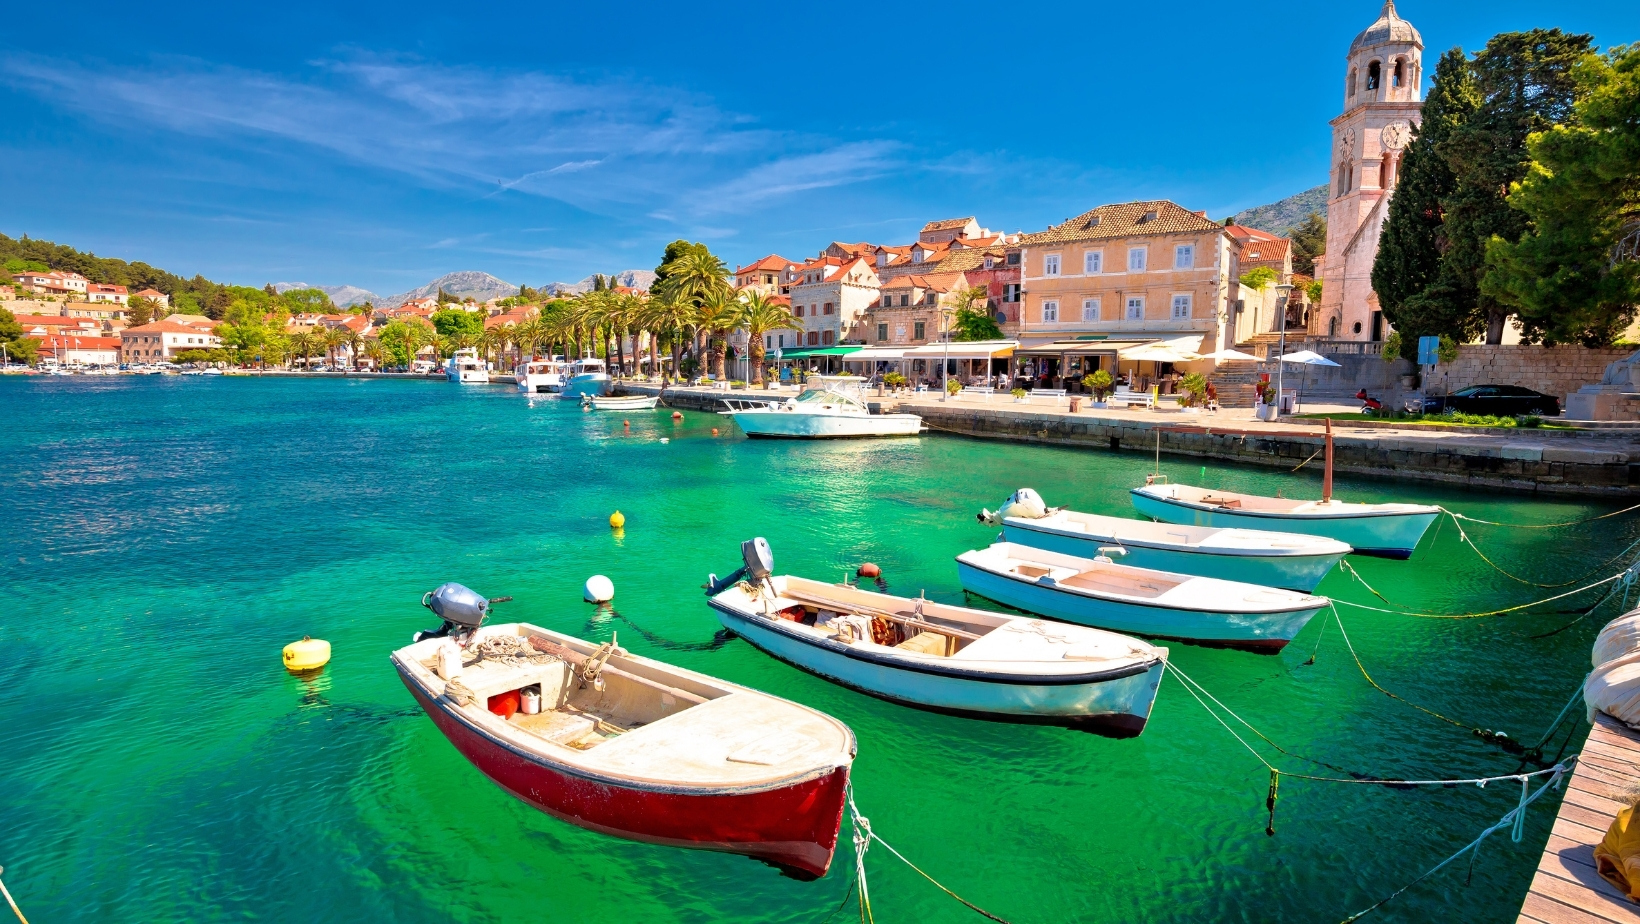 whats a good time to visit croatia